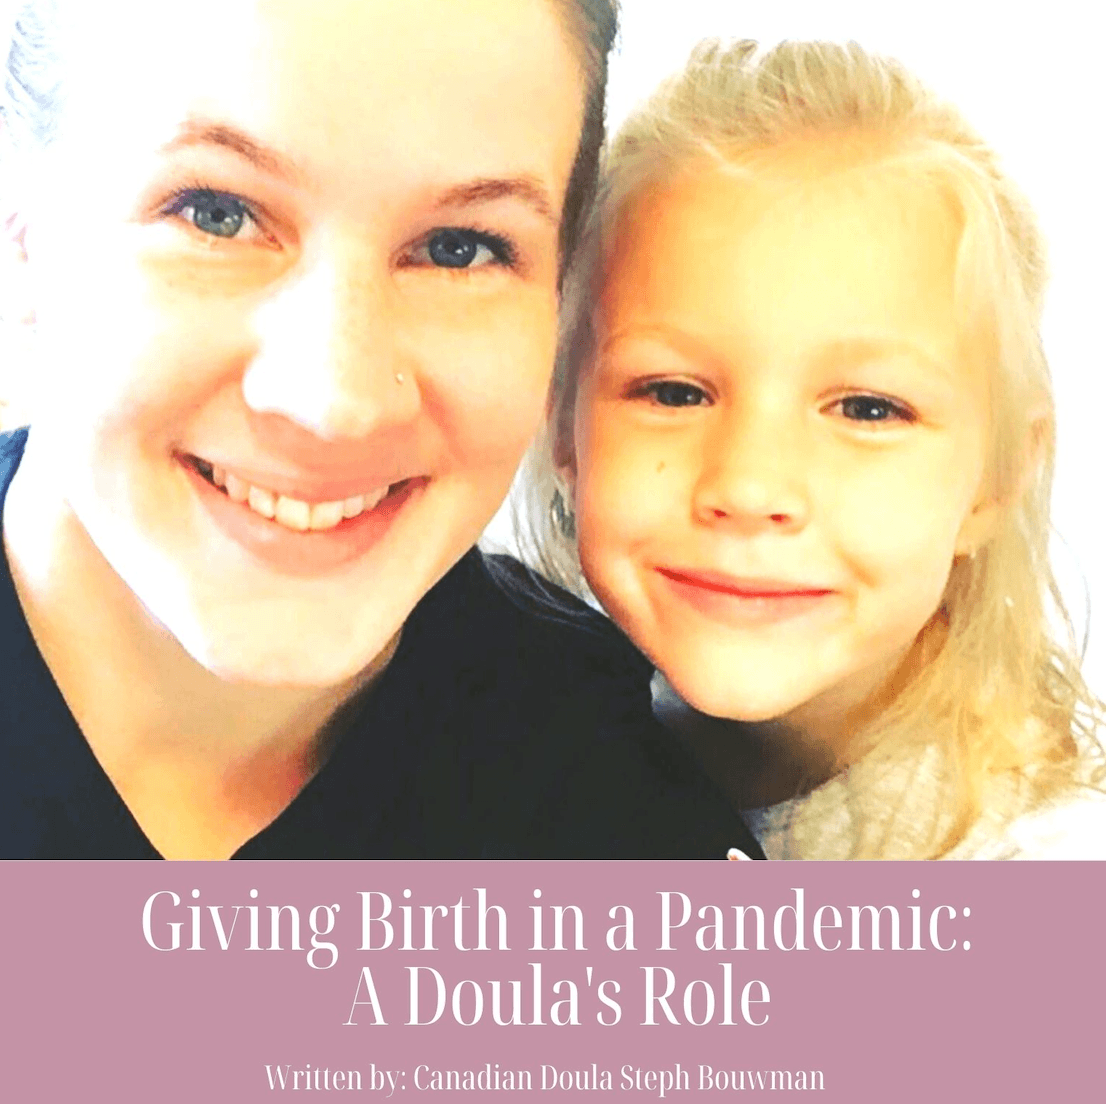 Giving Birth in a Pandemic: A Doula’s Role